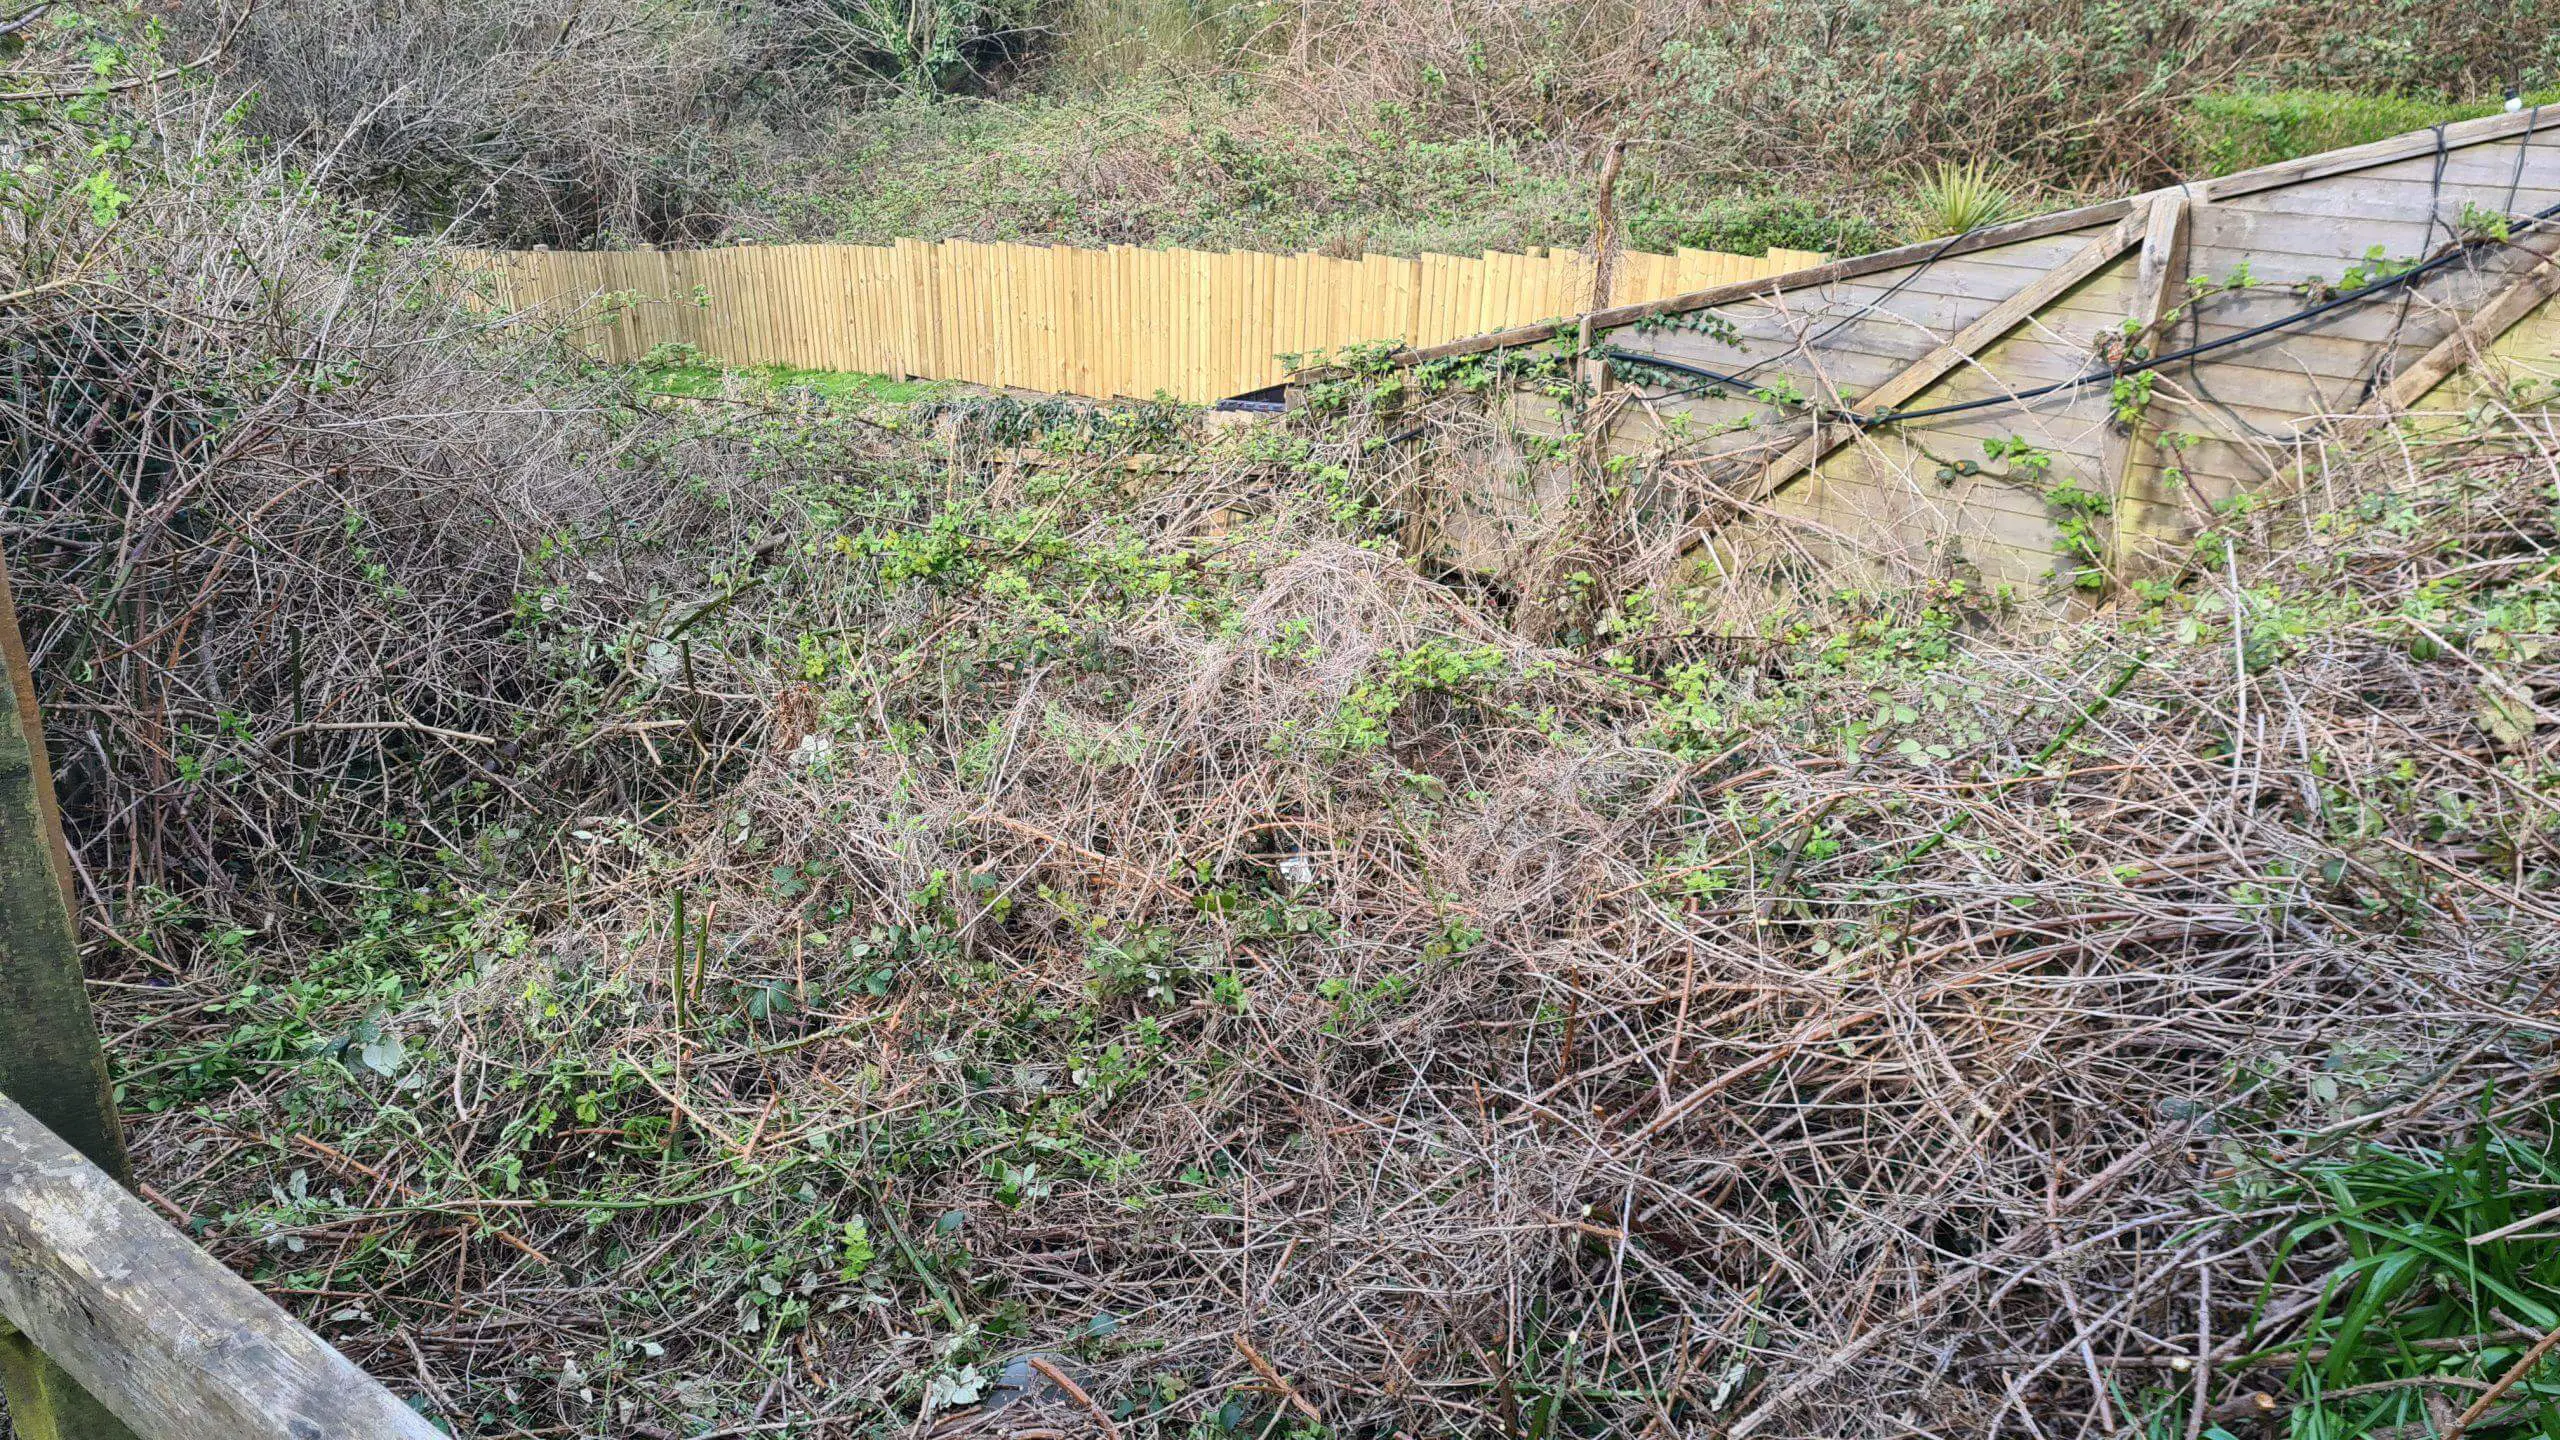 The task of completing a site clearance is no easy task when confronted with an overgrown garden such as this one with brambles